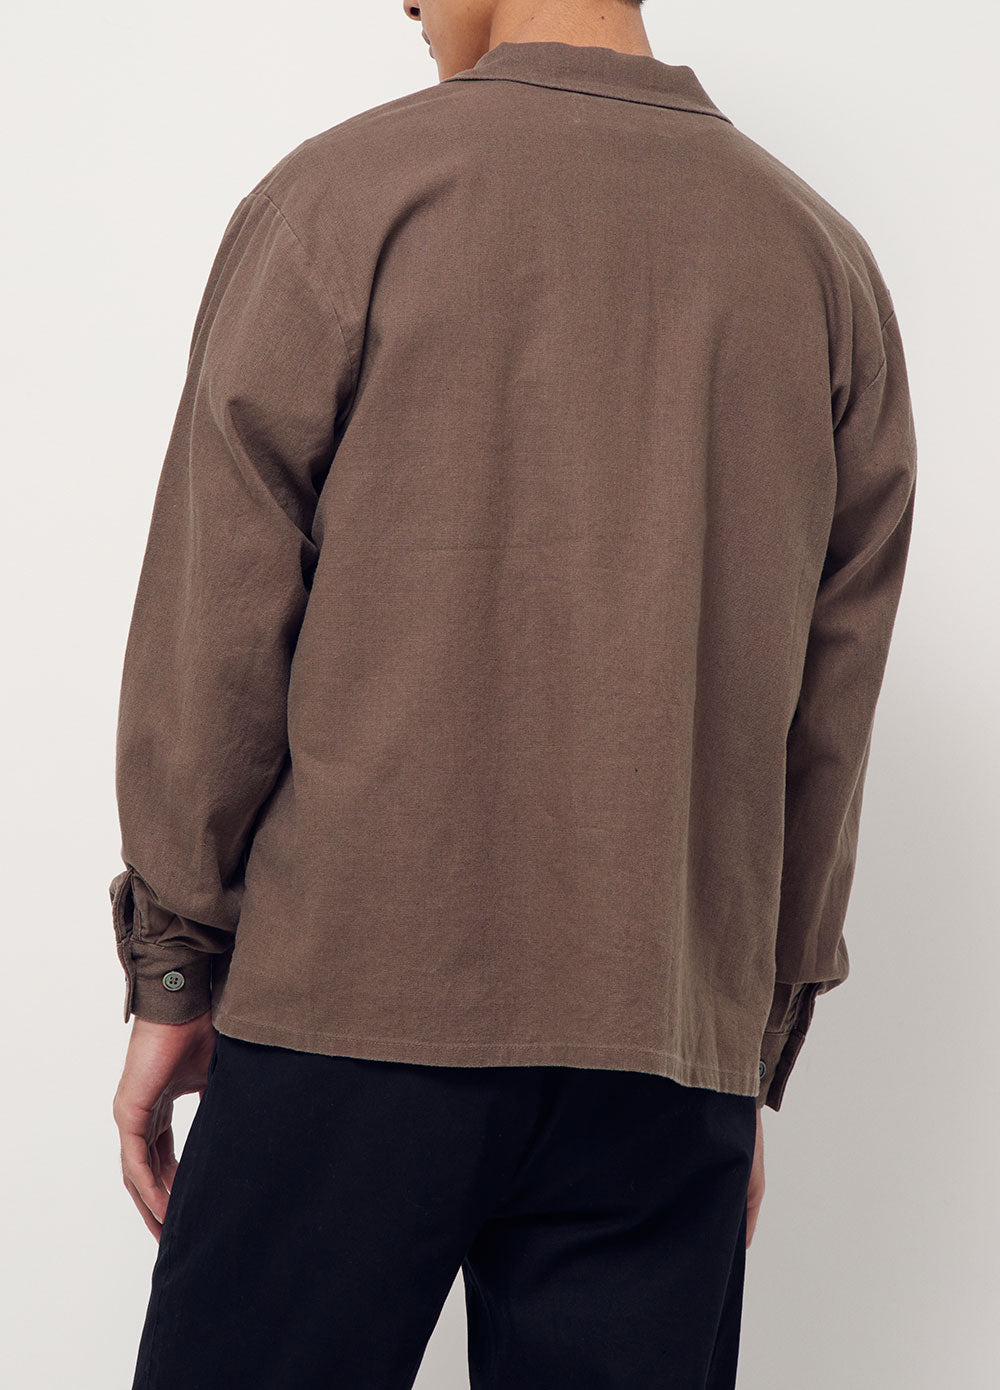 Men's Brown Torento Overshirt by Incu Collection | Incu